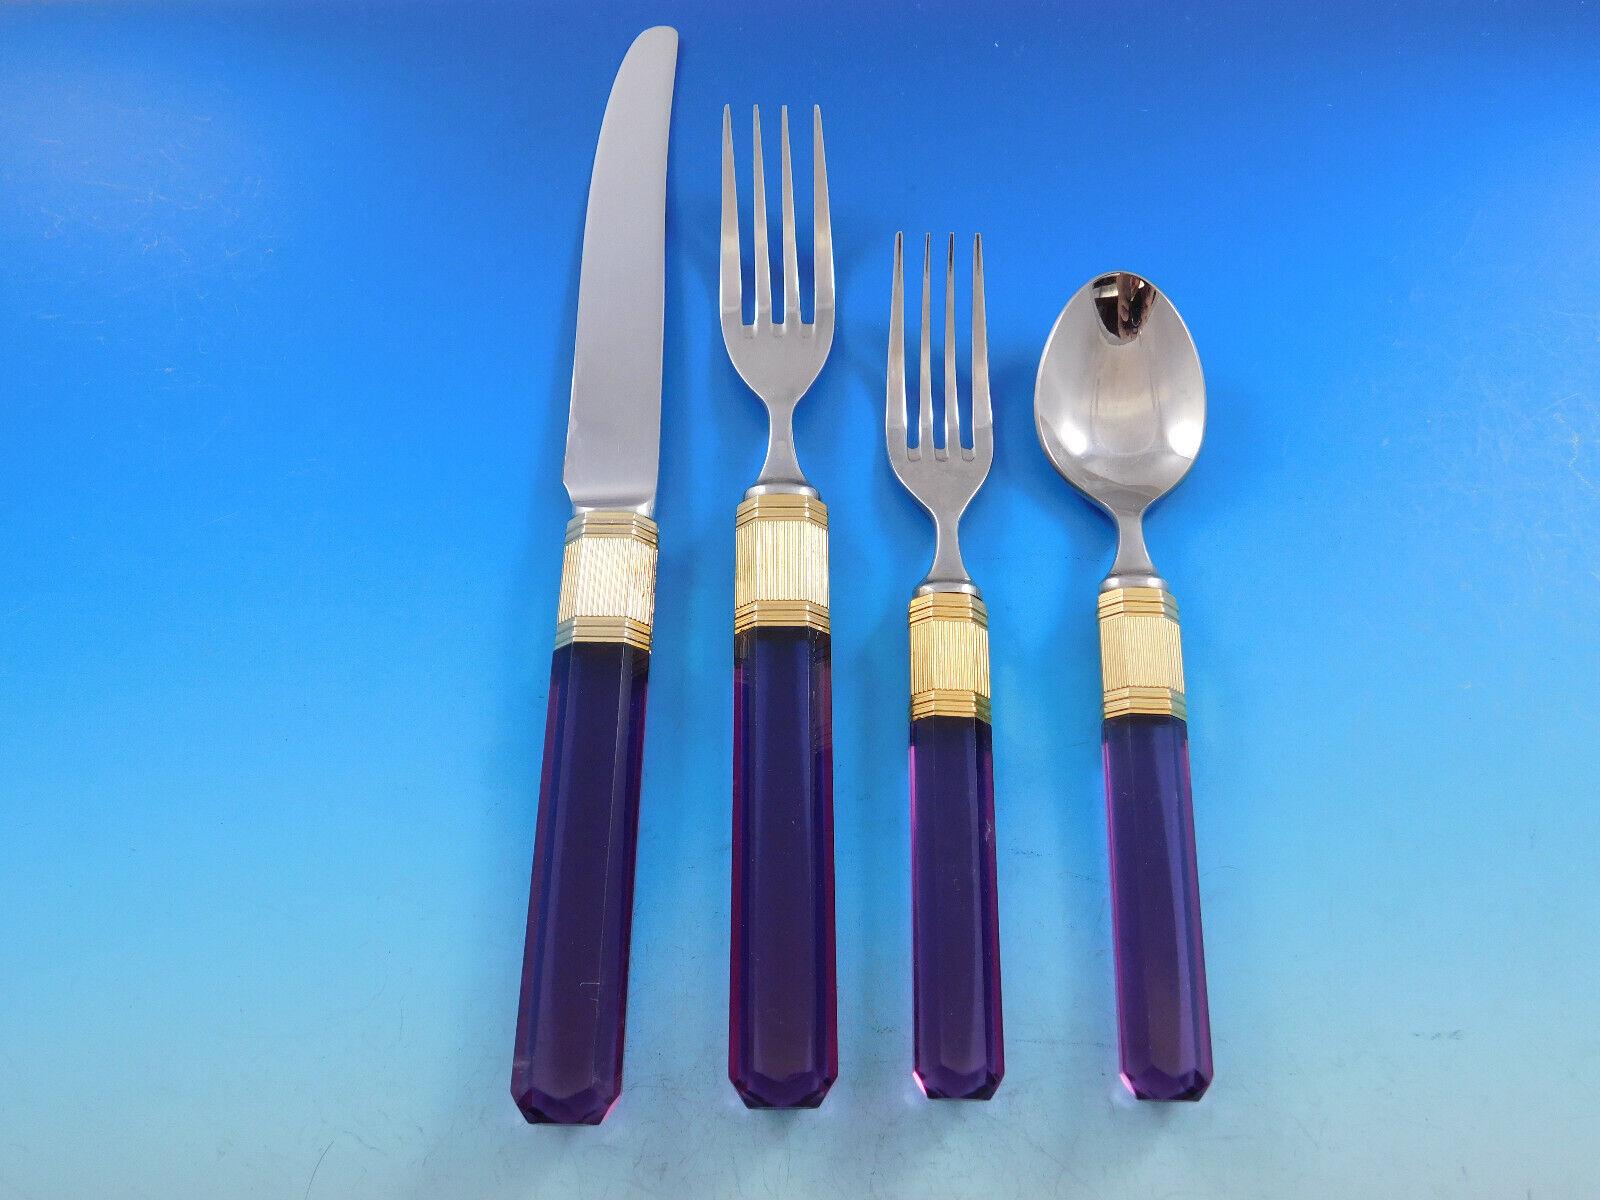 Elegant stainless steel Prisma - Amethyst by designer Larry Laslo for Mikasa - Japan, circa 1982. The handles of this set are made of lovely amethyst color Lucite with beveled edges and a prism end and gold stainless steel band accent. They reflect